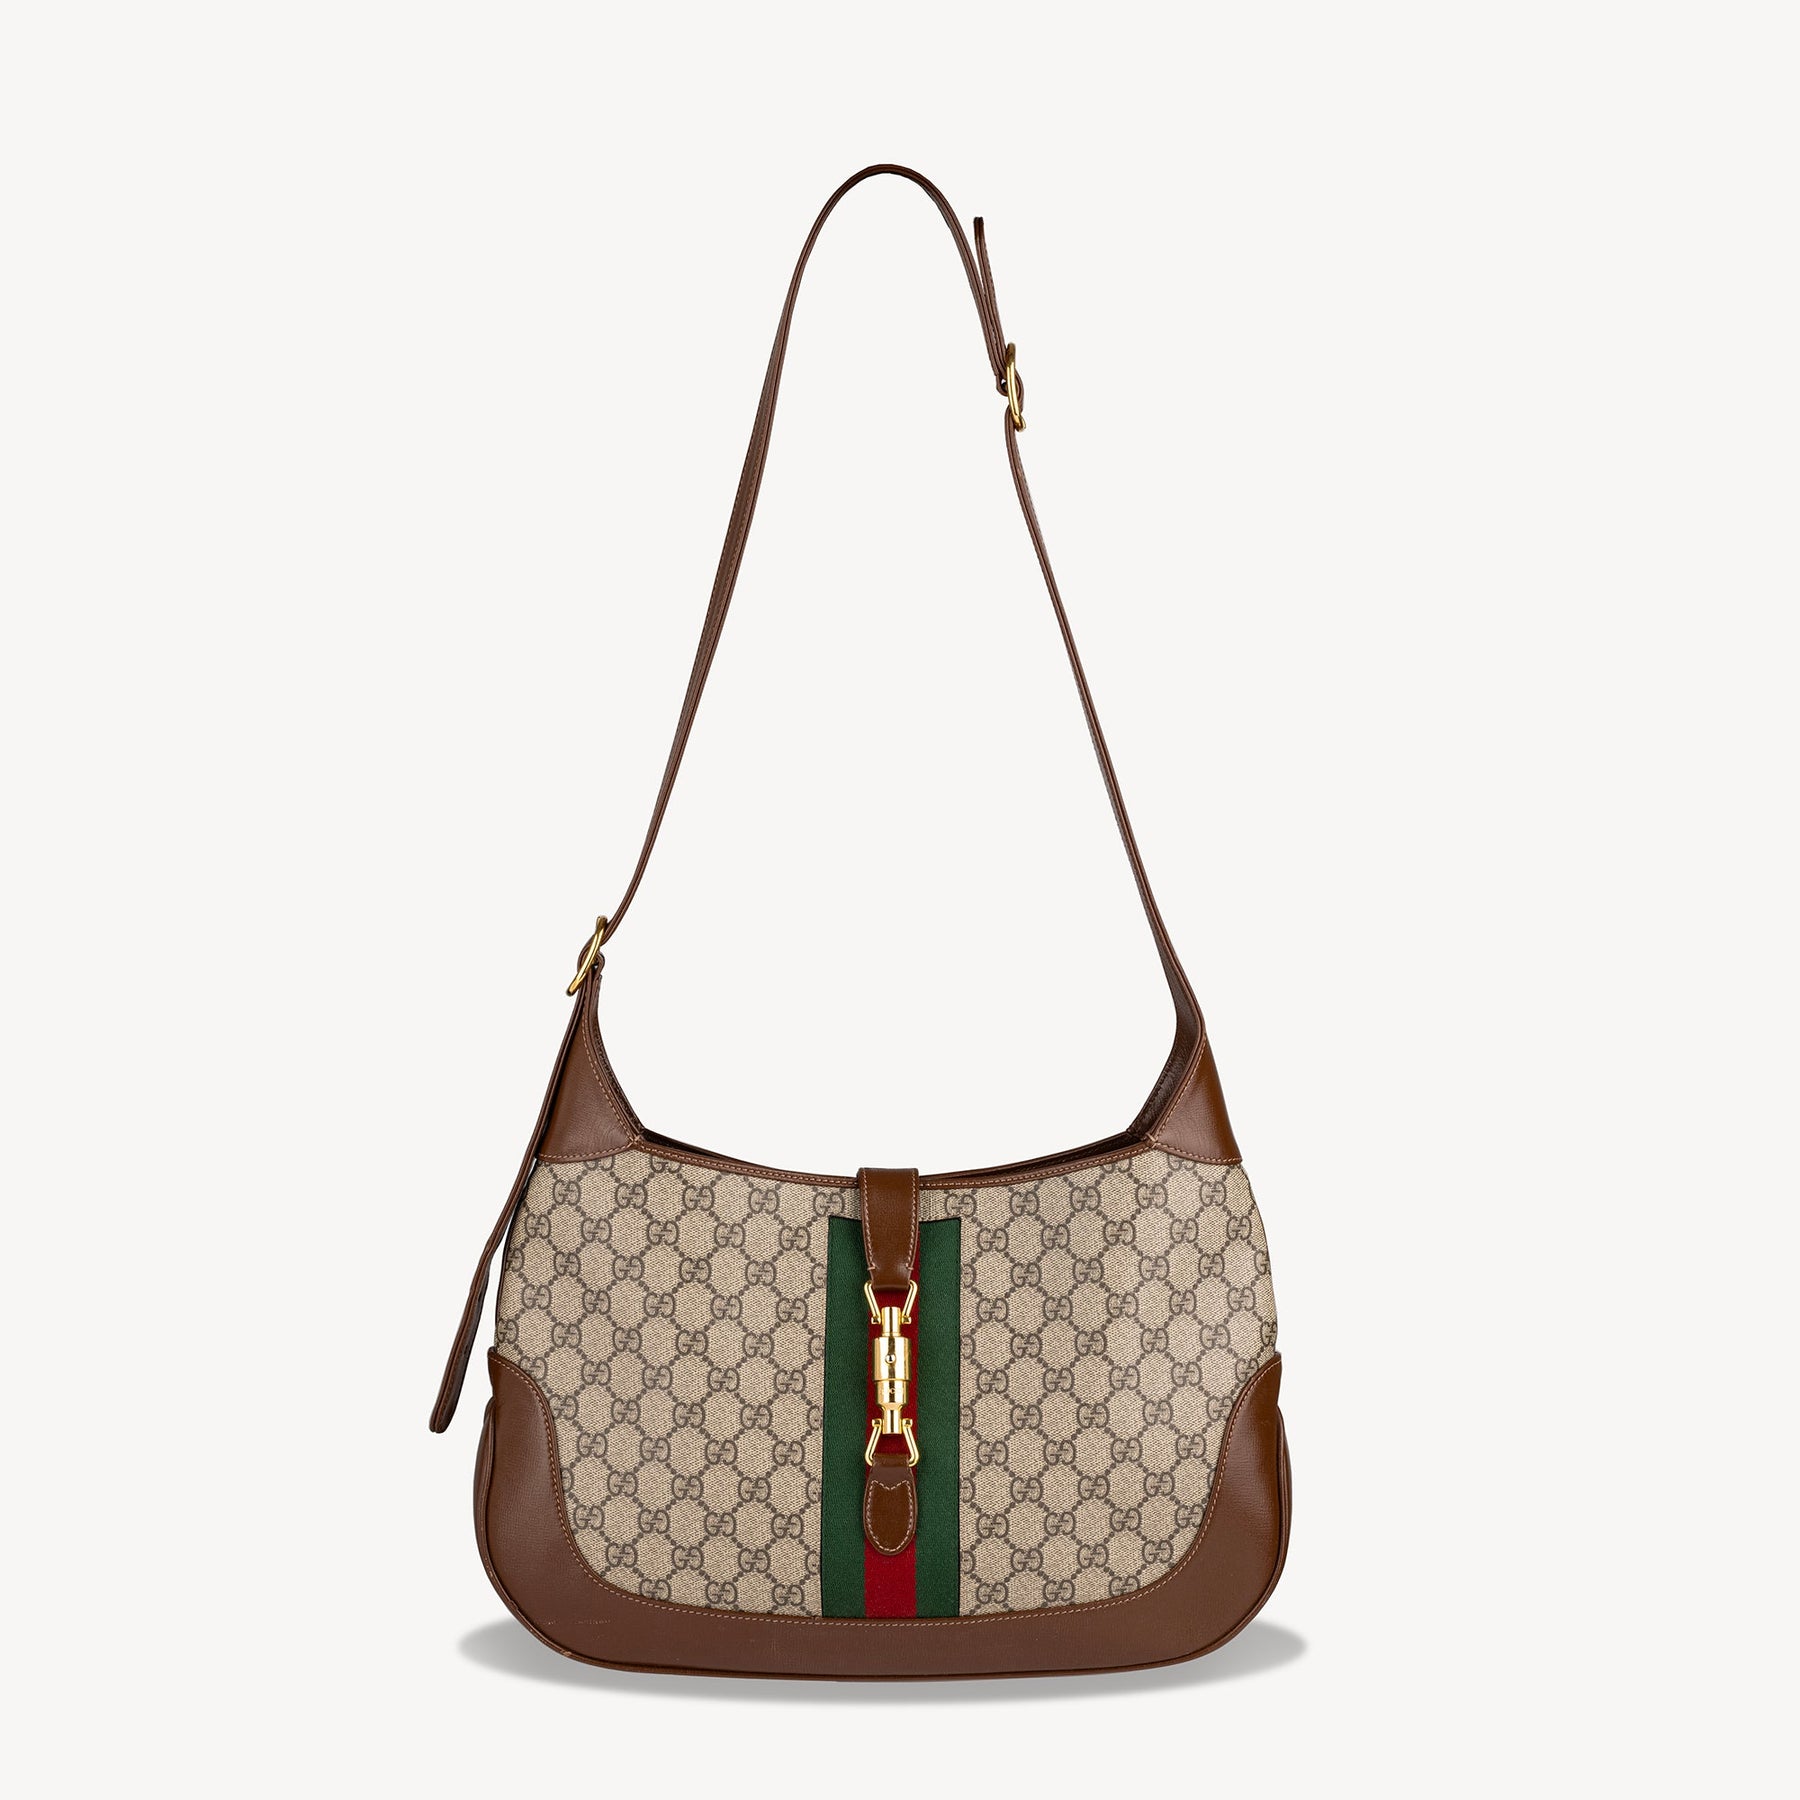 Why Gucci's Ultimate It Bag Is the Undoubtedly the Jackie